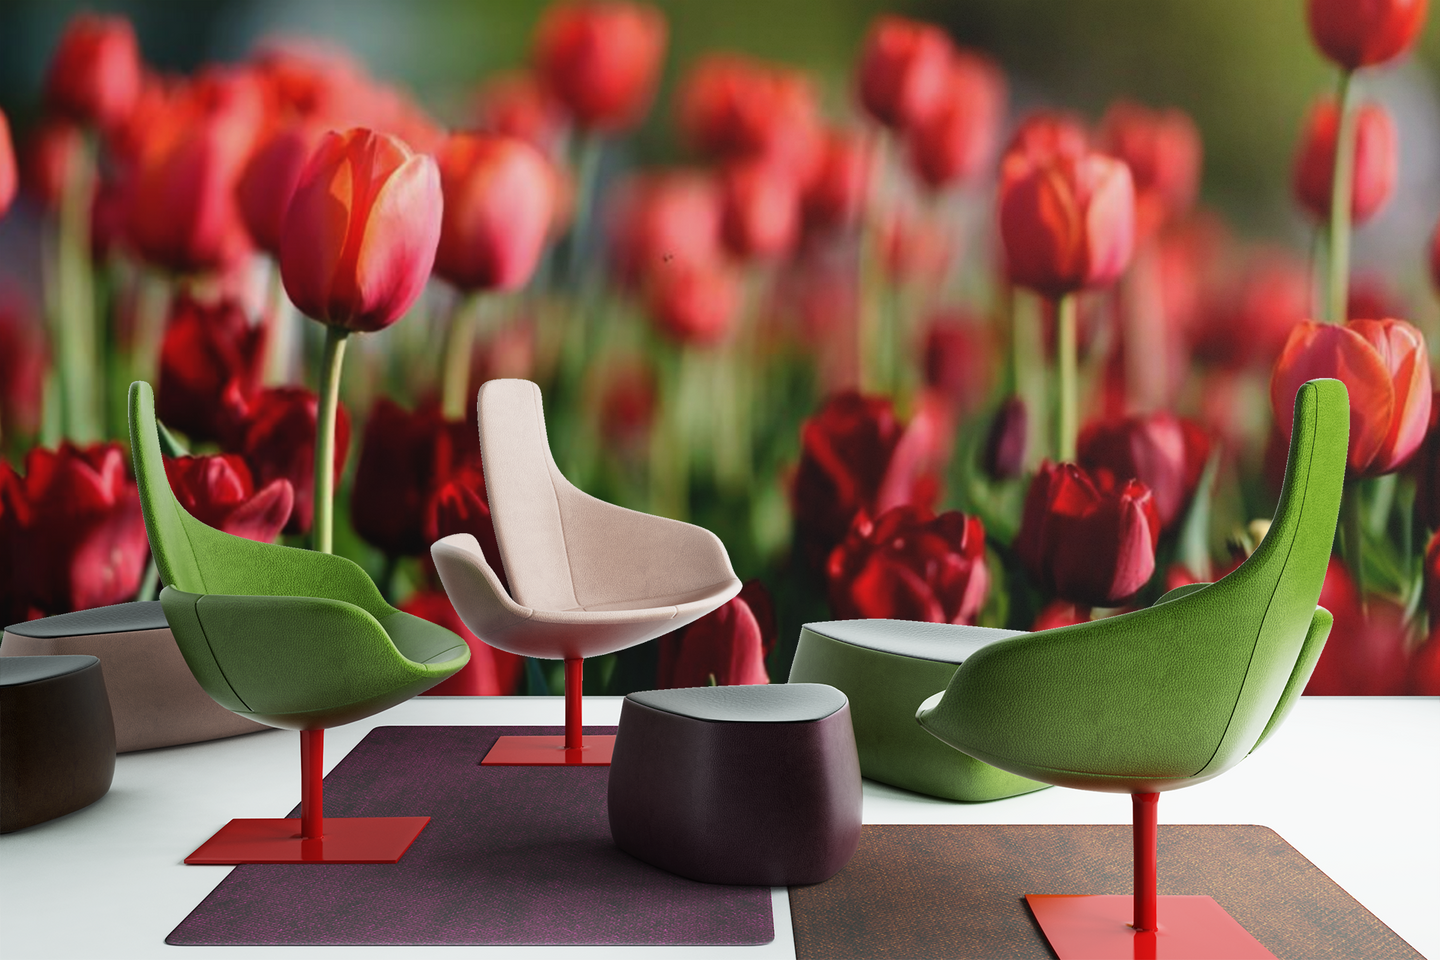 Red Tulips - 02138 - Wall Murals Printing - wall art